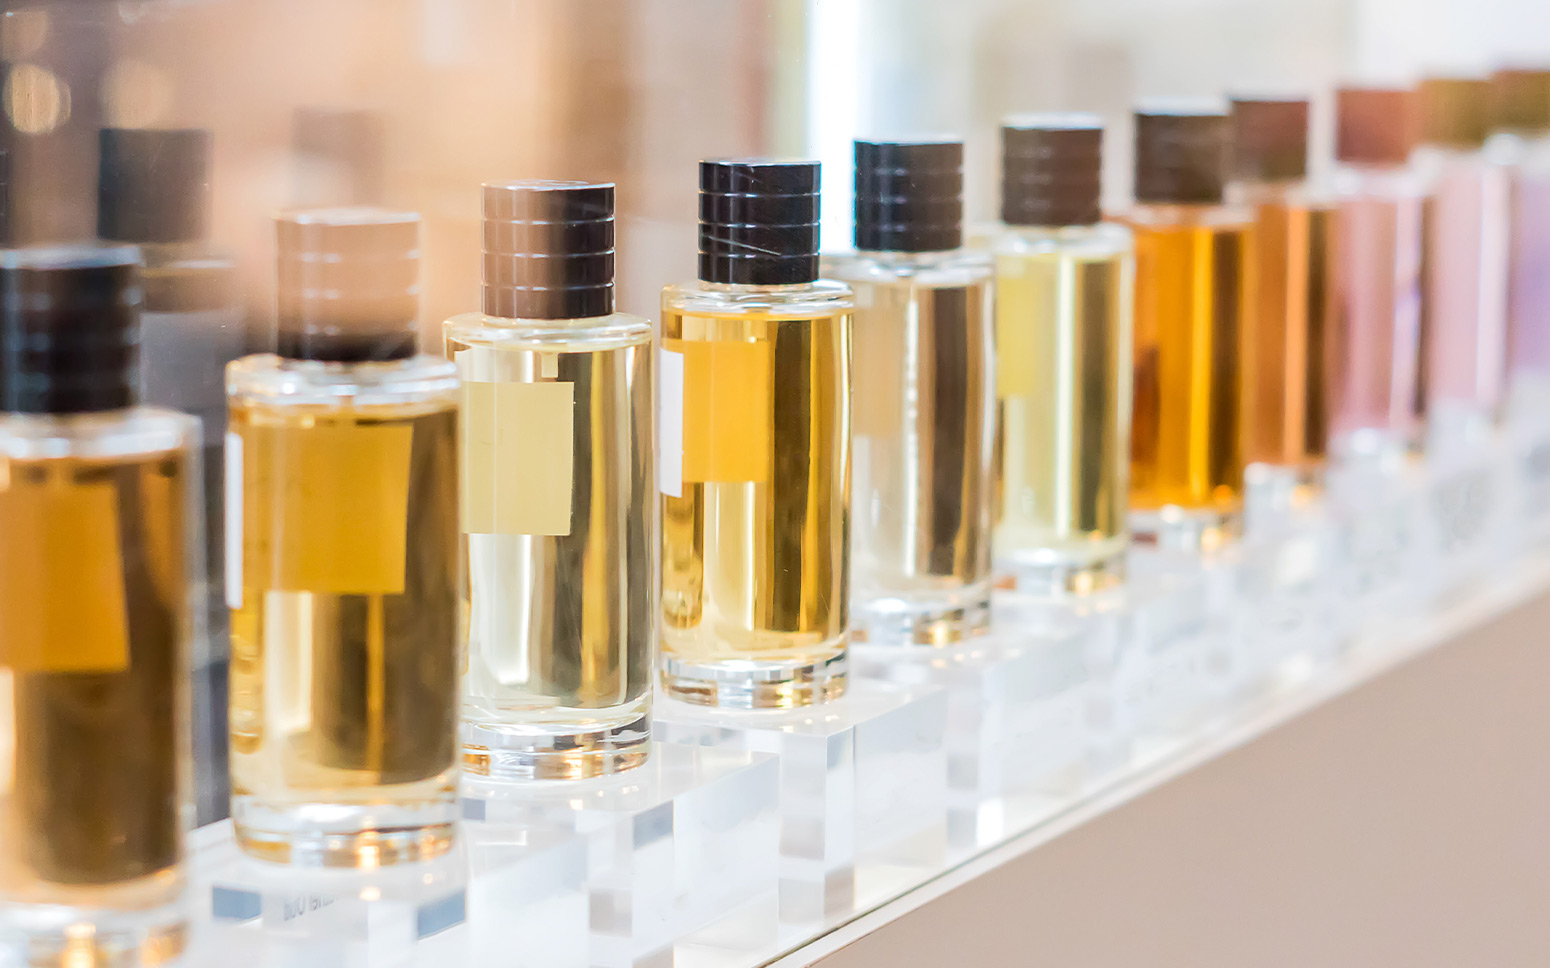 Perfume samples in a retail environment. Keeping track of product data for all your SKUs can be difficult. Surefront software can help.